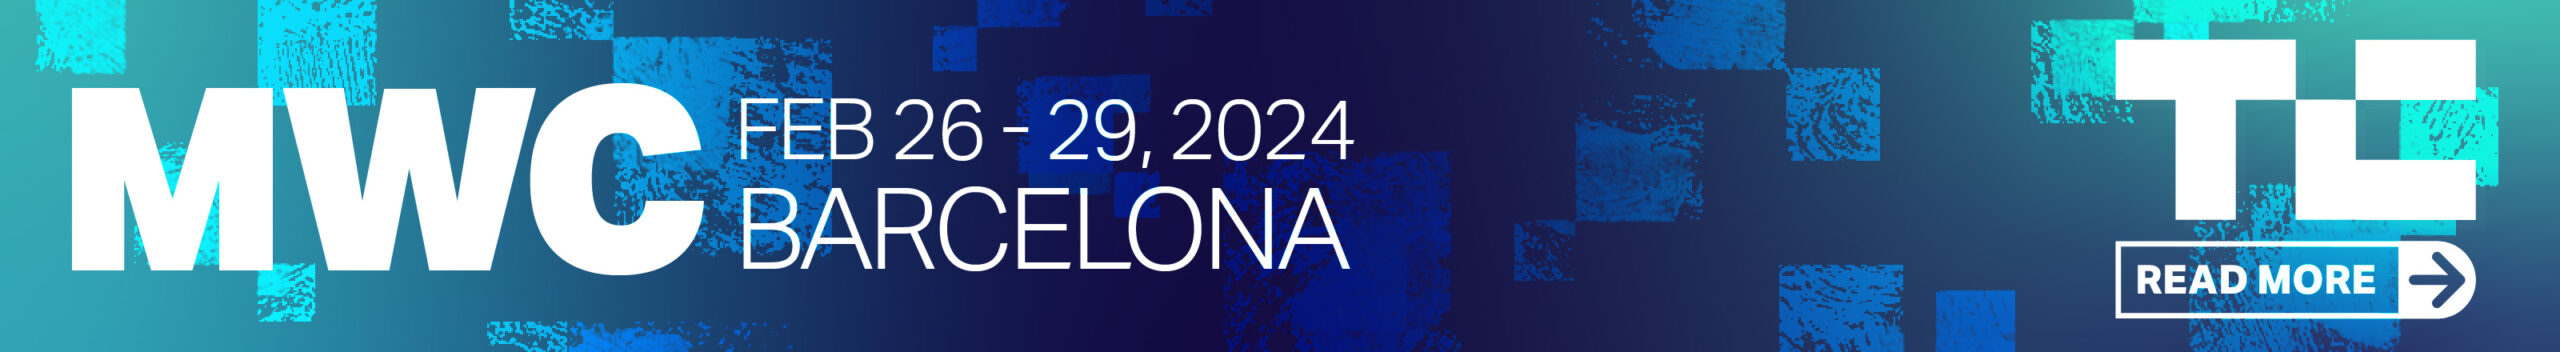 Read more about MWC 2024 on TechCrunch